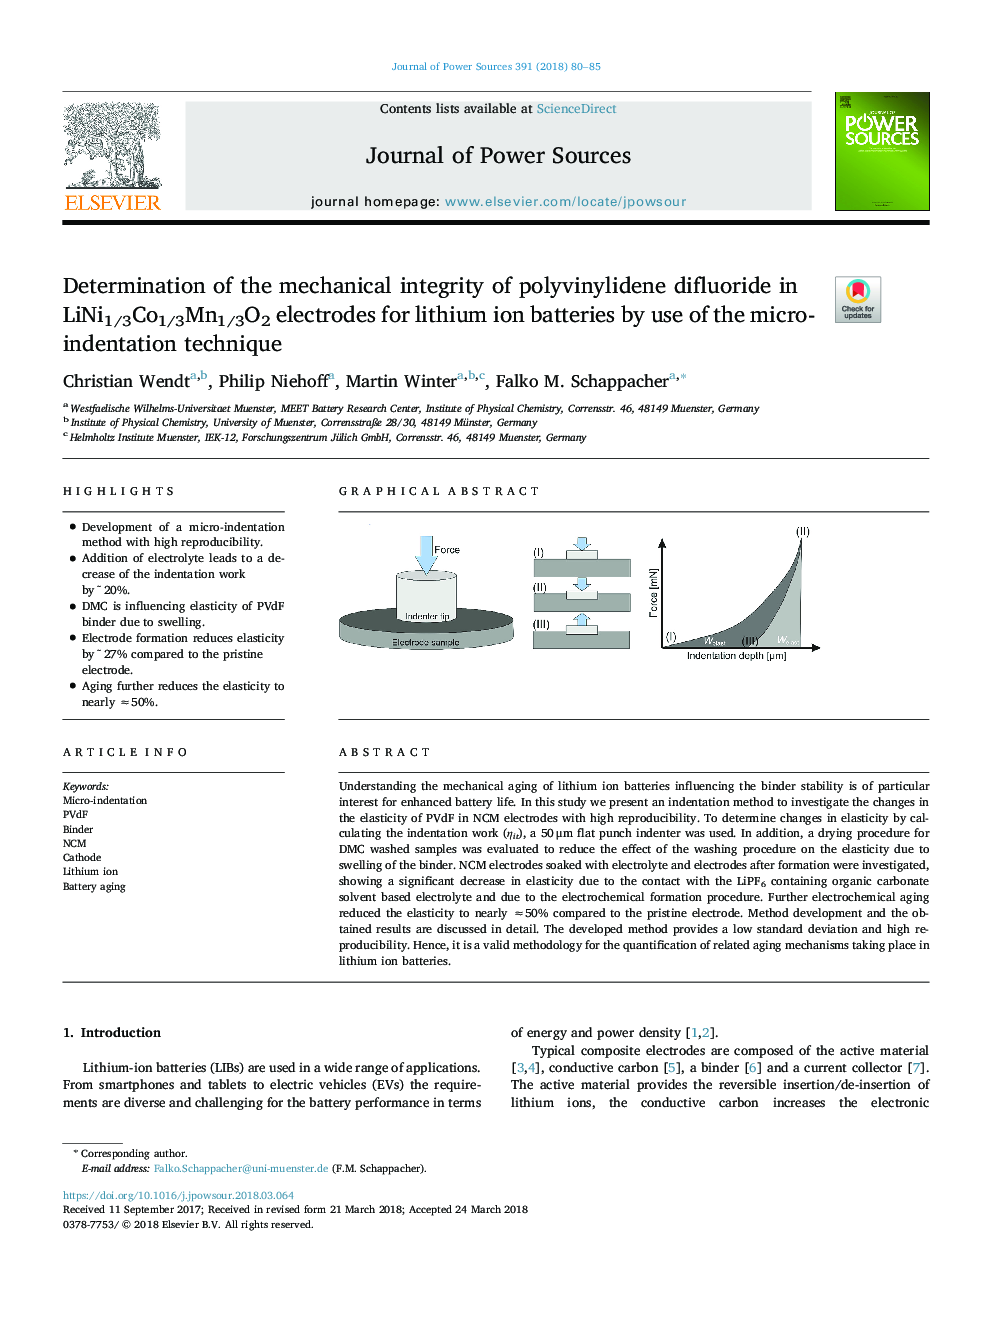 Determination of the mechanical integrity of polyvinylidene difluoride in LiNi1/3Co1/3Mn1/3O2 electrodes for lithium ion batteries by use of the micro-indentation technique